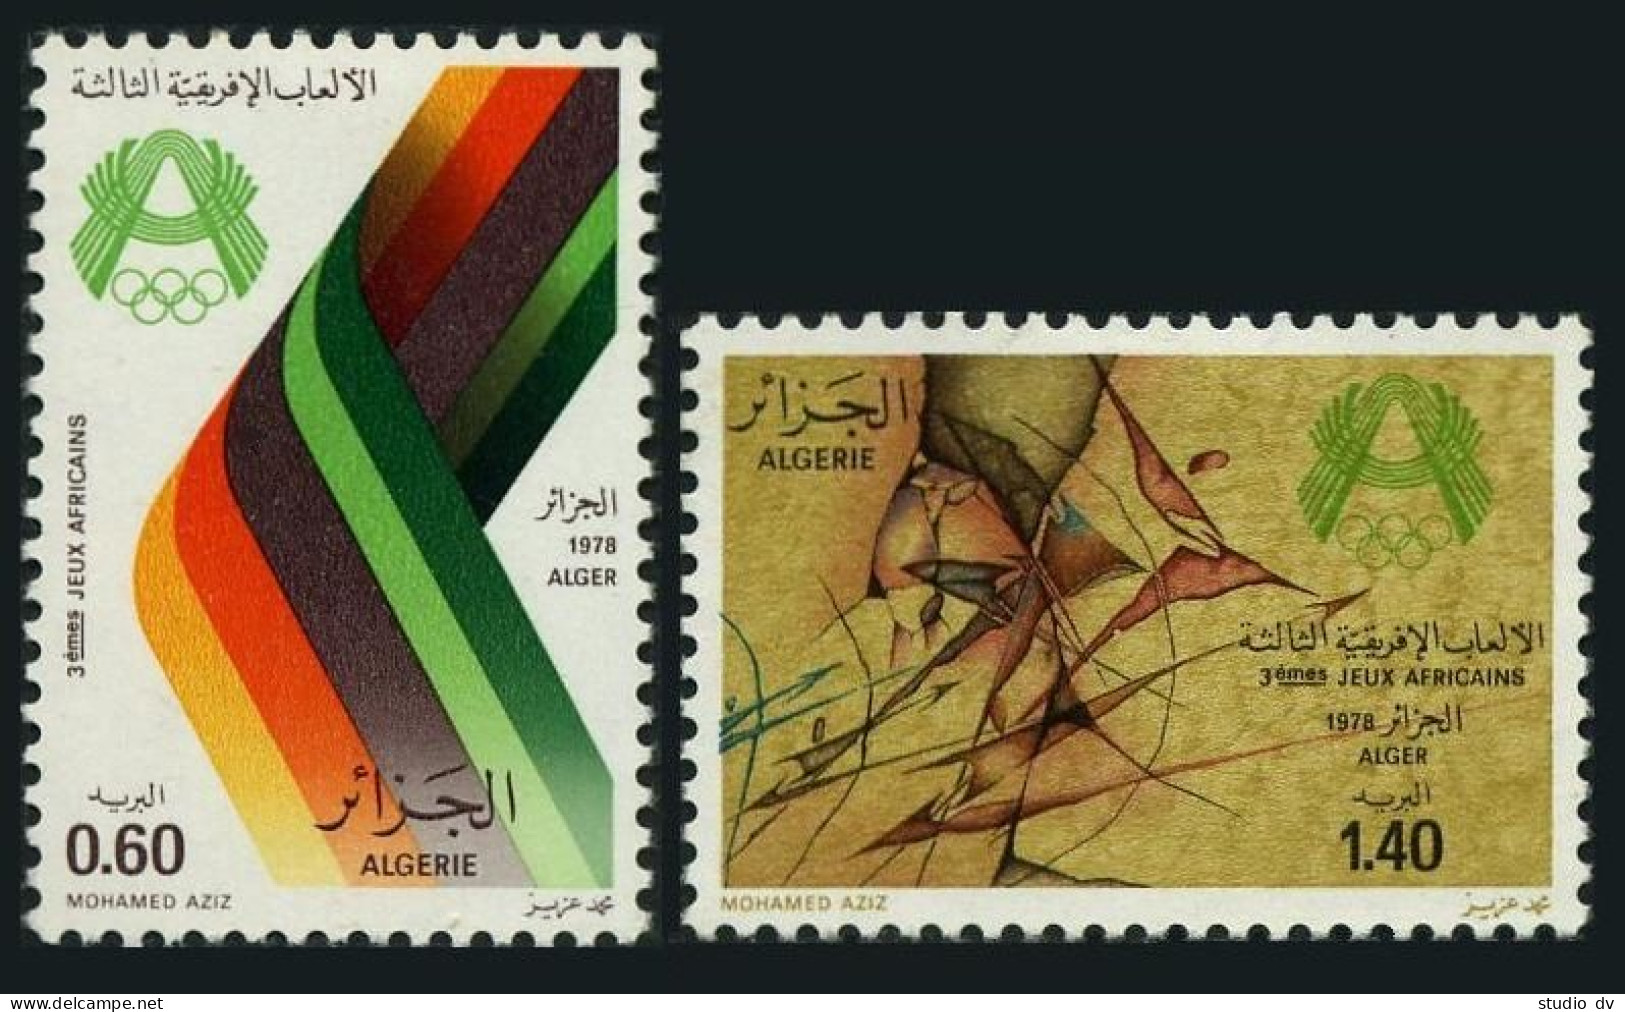 Algeria 601-602,MNH.Michel 711-712 3rd African Games,1977.Wall Painting. - Algérie (1962-...)